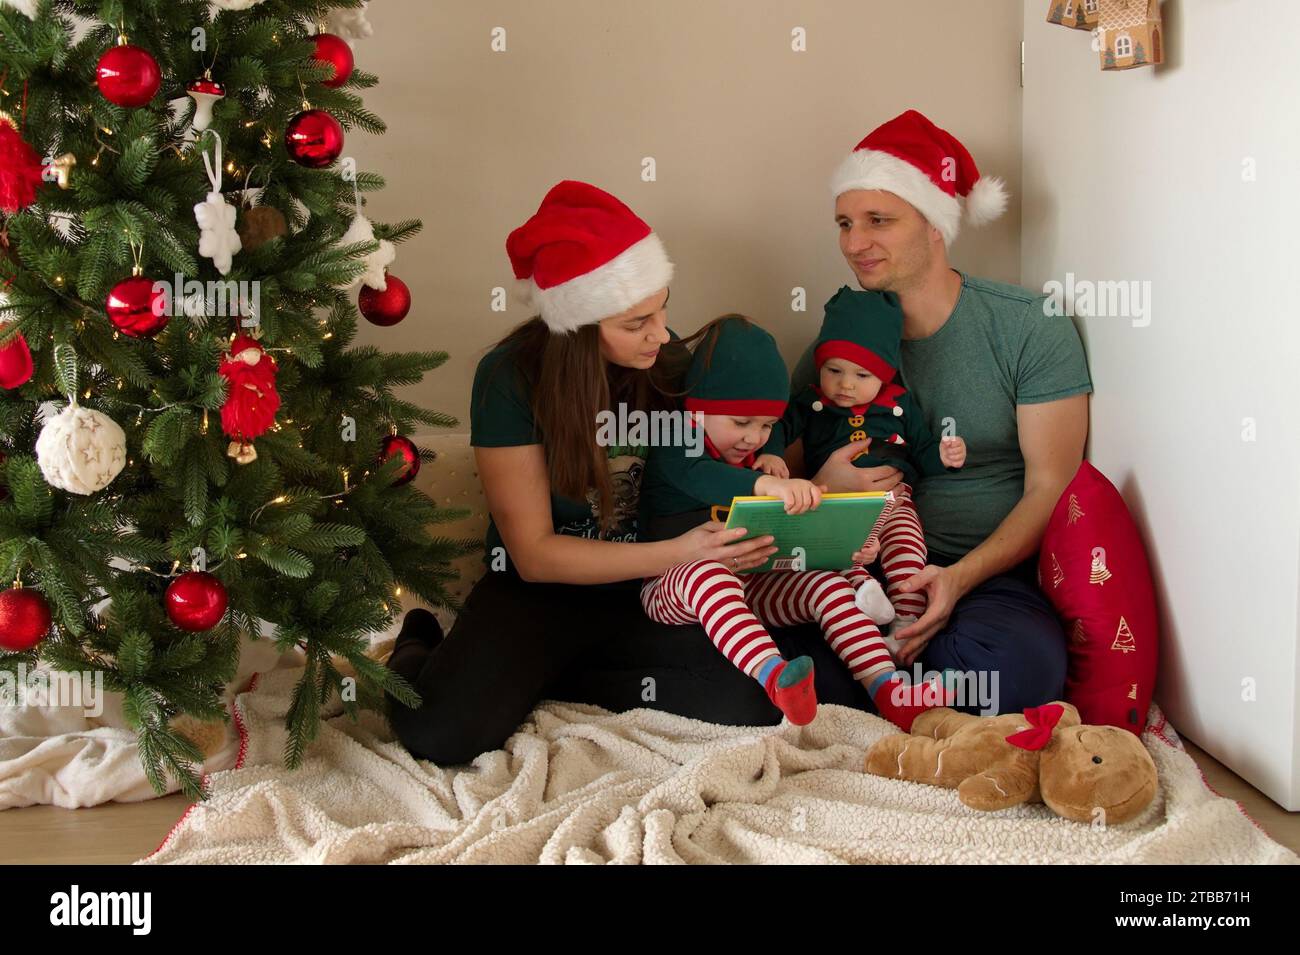 Family with toddler and baby girl sitting in front of Christmas tree Stock Photo